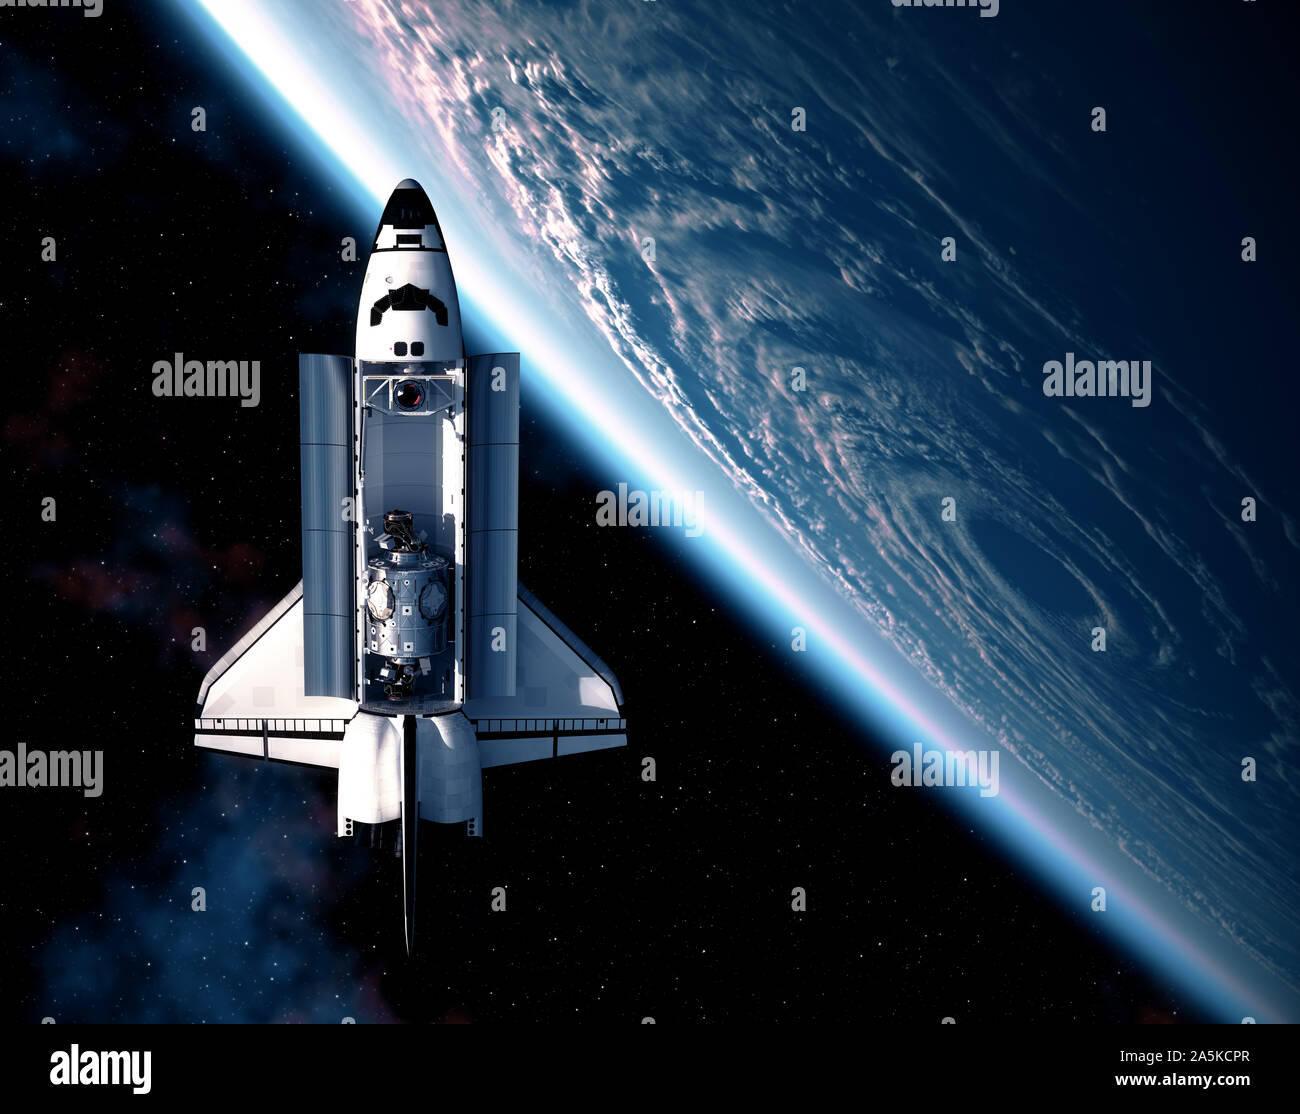 Space Shuttle On Background Of The Big Hurricane. 3D Illustration. Stock Photo